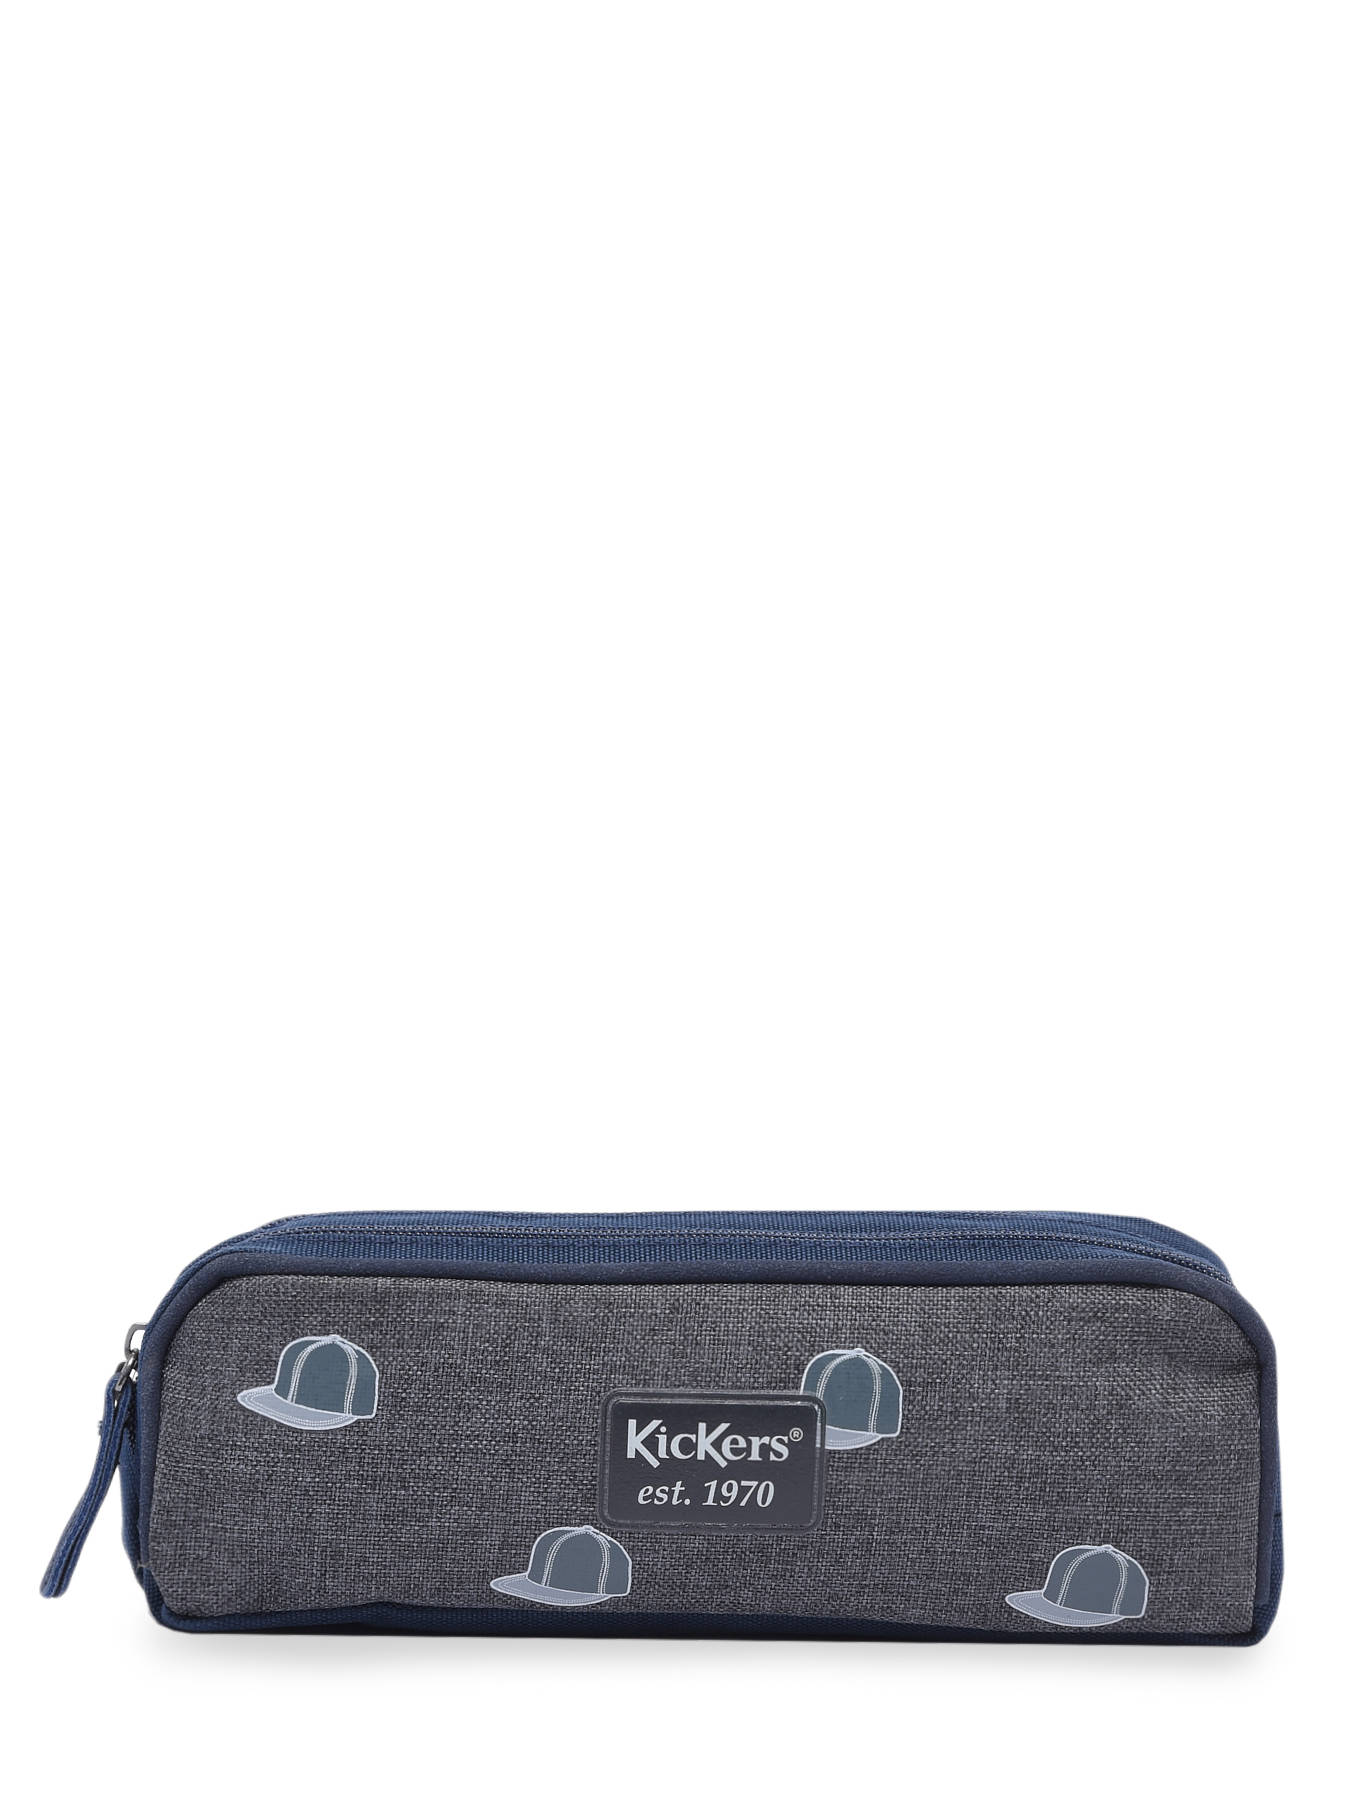 KICKERS Trousse 2 Compartiments Kickers